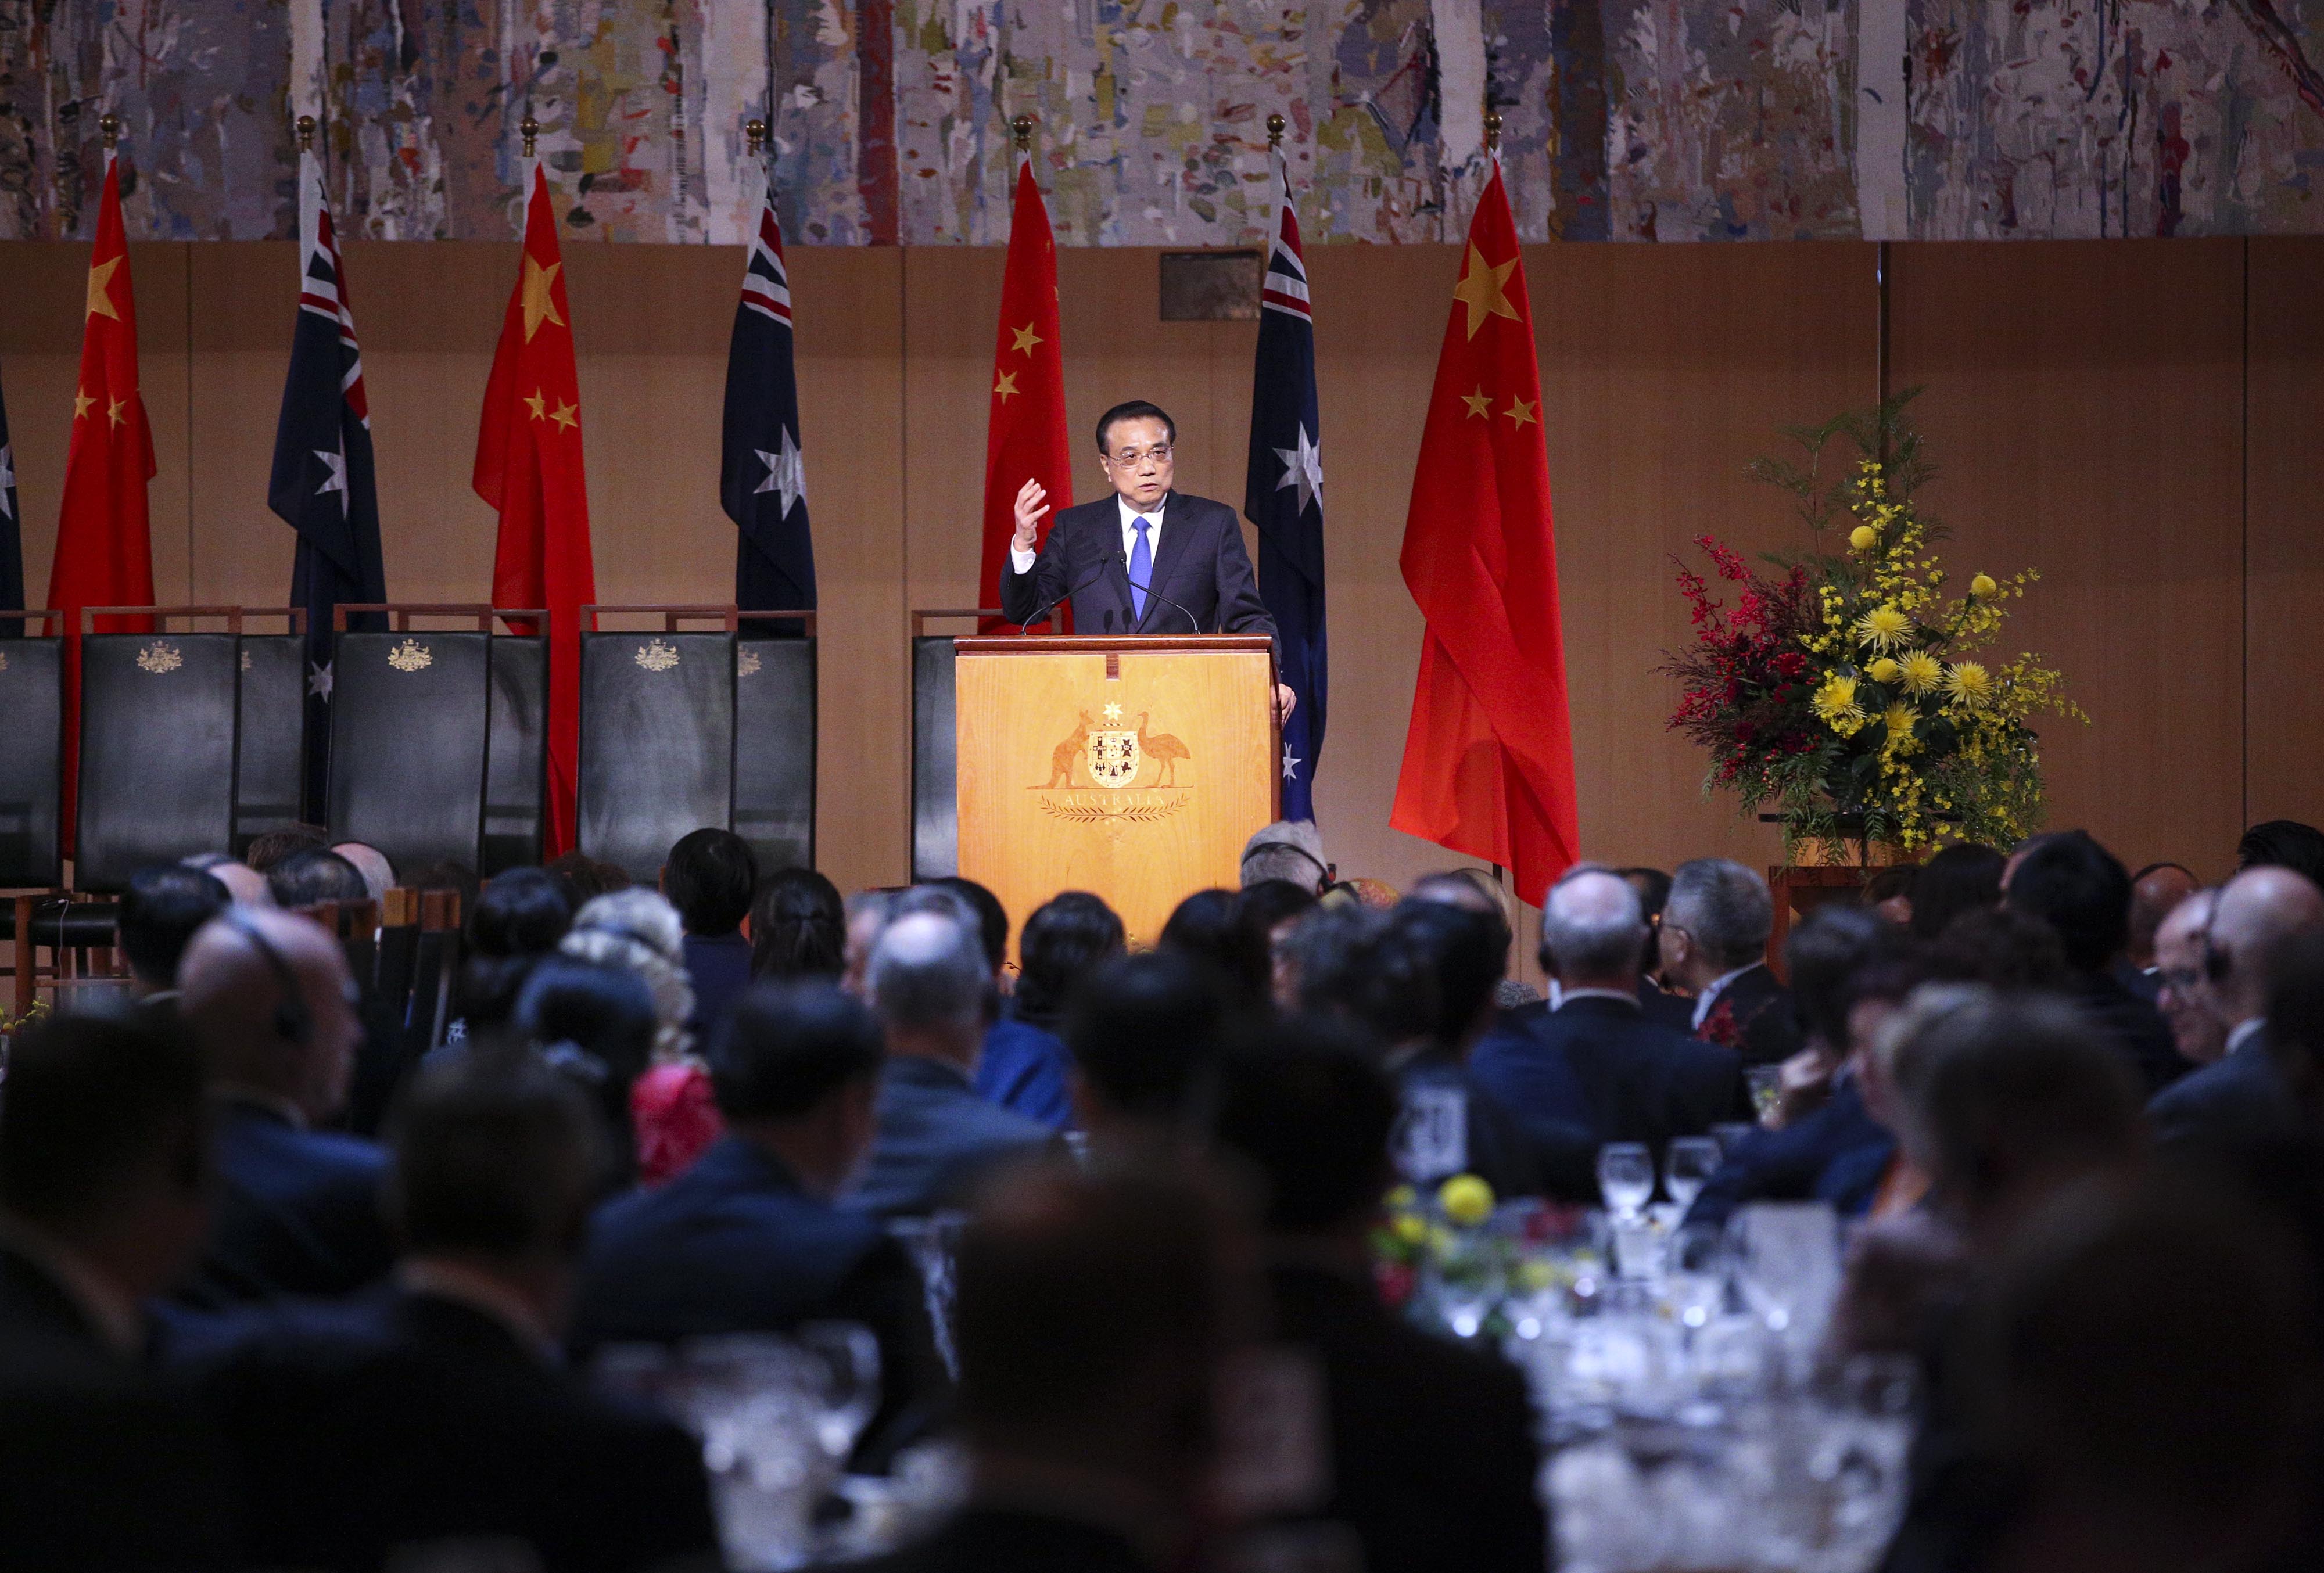 Chinese Premier Li Keqiang delivers a speech during a welcome banquet in Canberra, Australia, on March 23, 2017. [Photo: gov.cn]